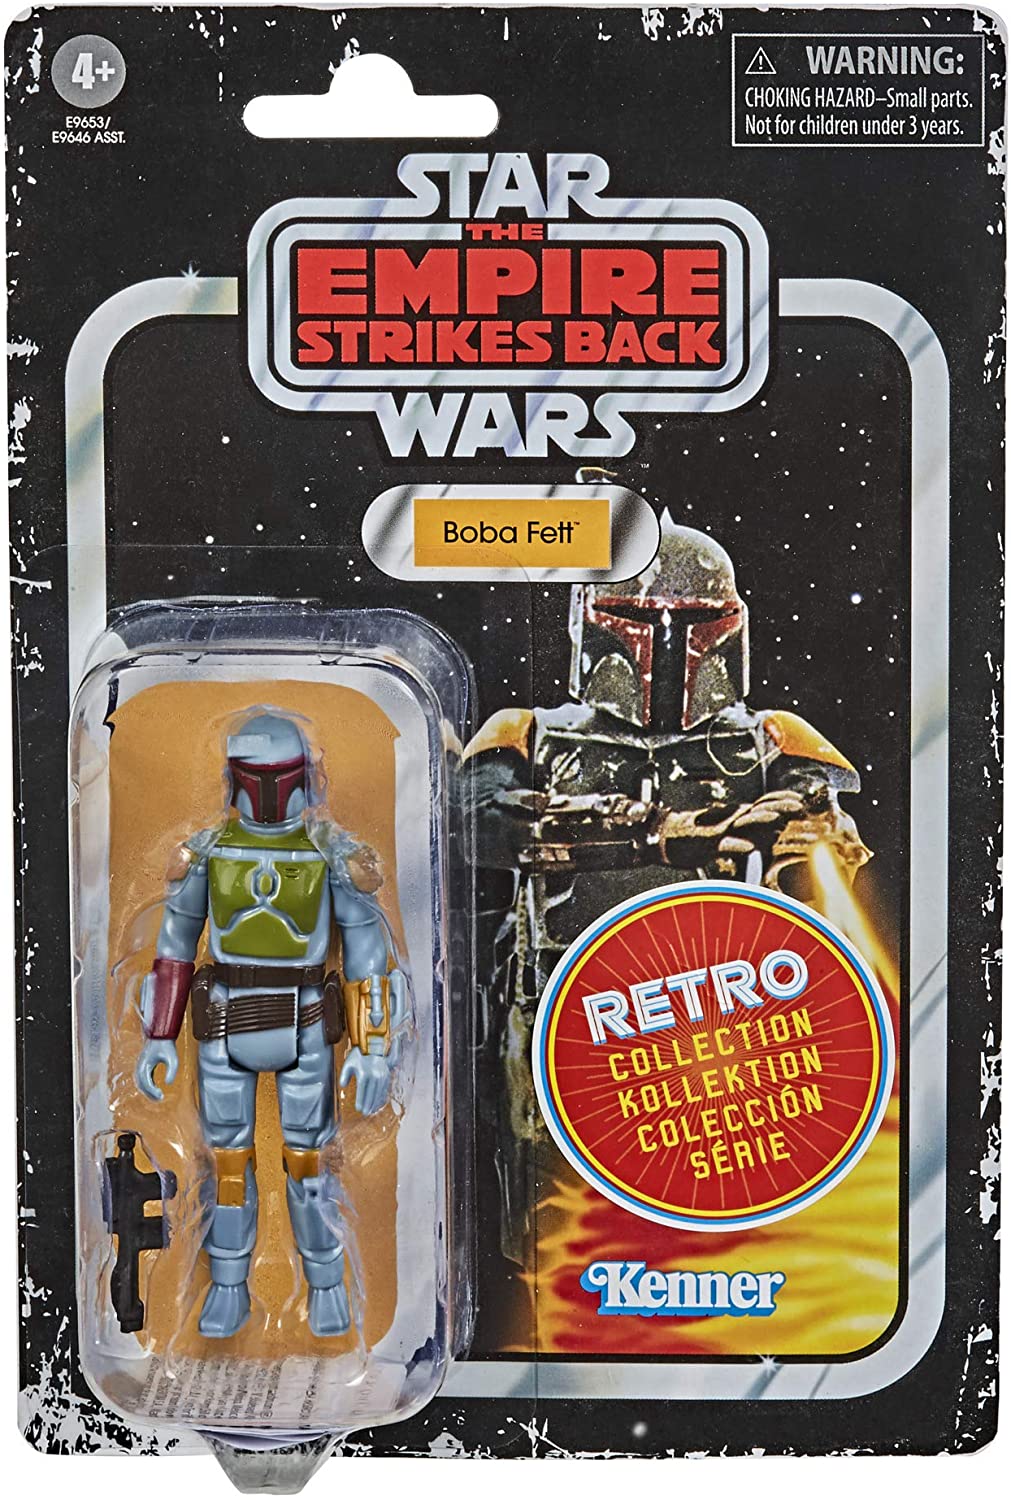 Star Wars Action Collection - Hasbro - Boba Fett (the C12